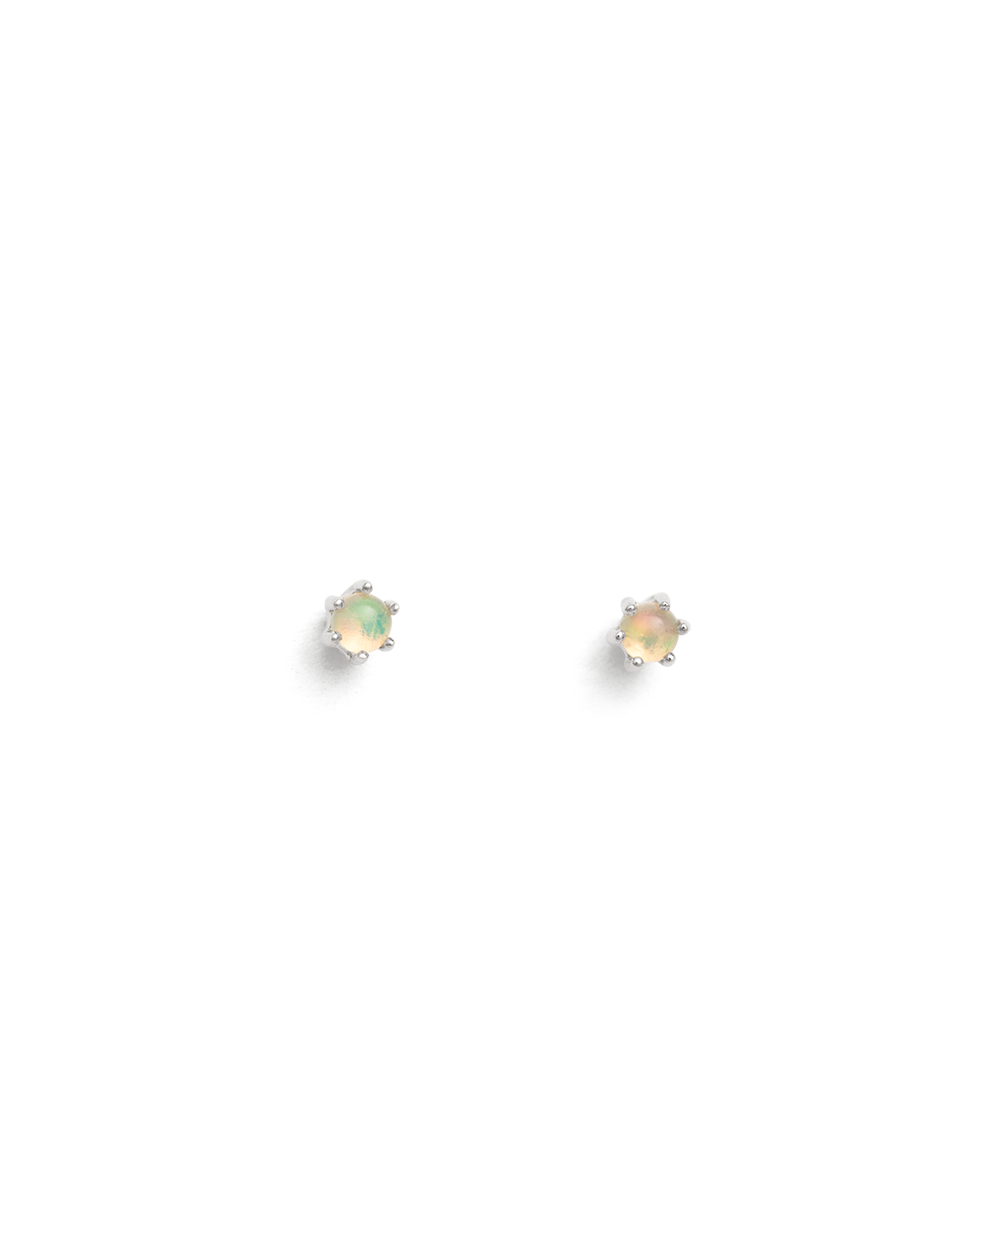 PETITE OPAL STUDS (STERLING SILVER) - IMAGE 1